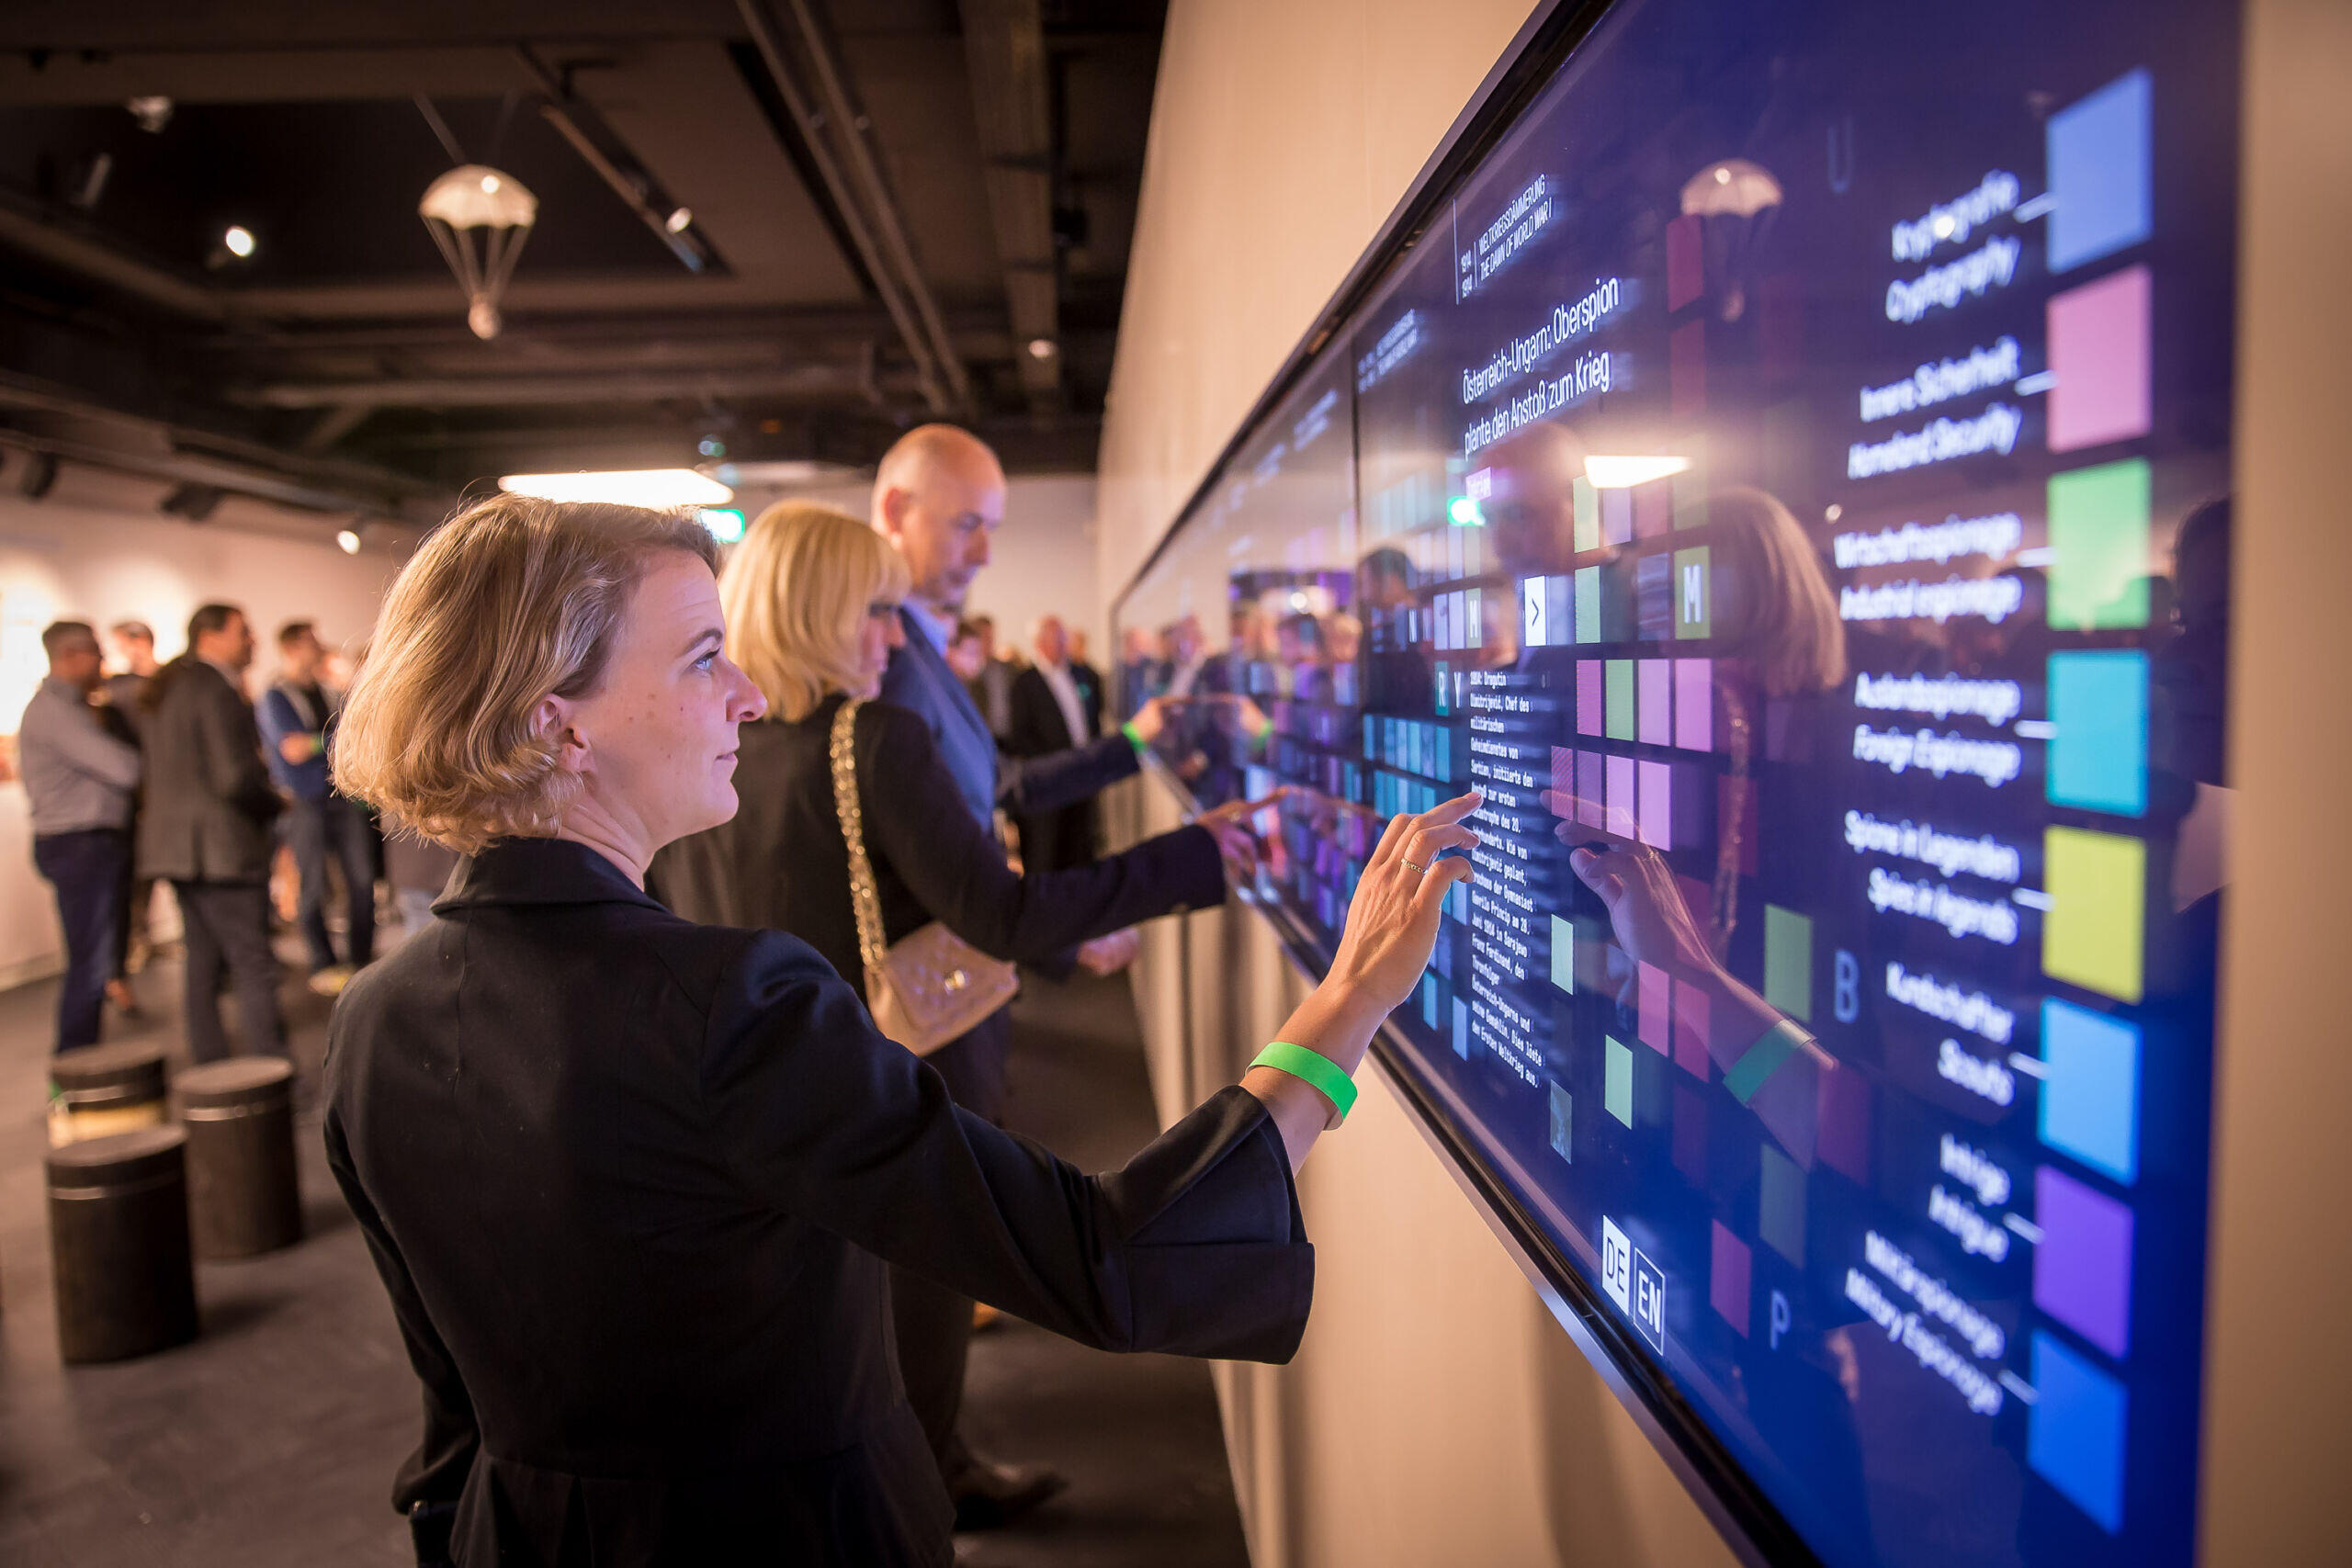 Visitors interact with large multi-touch wall in the German Spy Museum